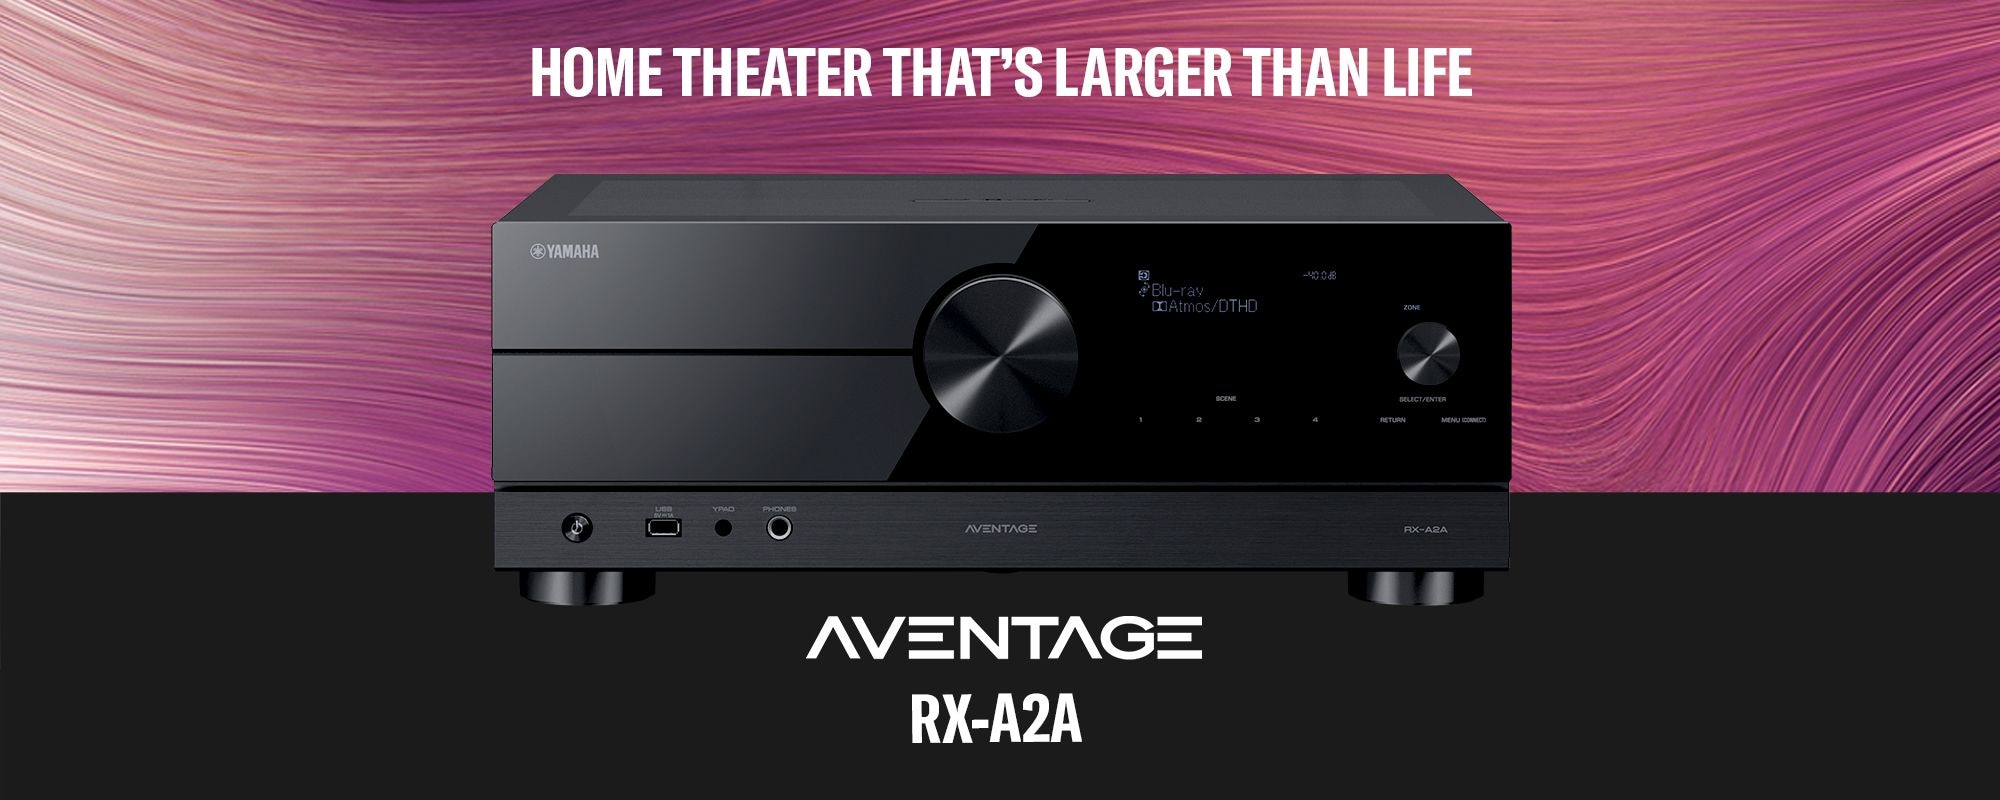 Home Theater That's Larger Than Life - Yamaha AVENTAGE RX-A2A Receiver Header - Mobile